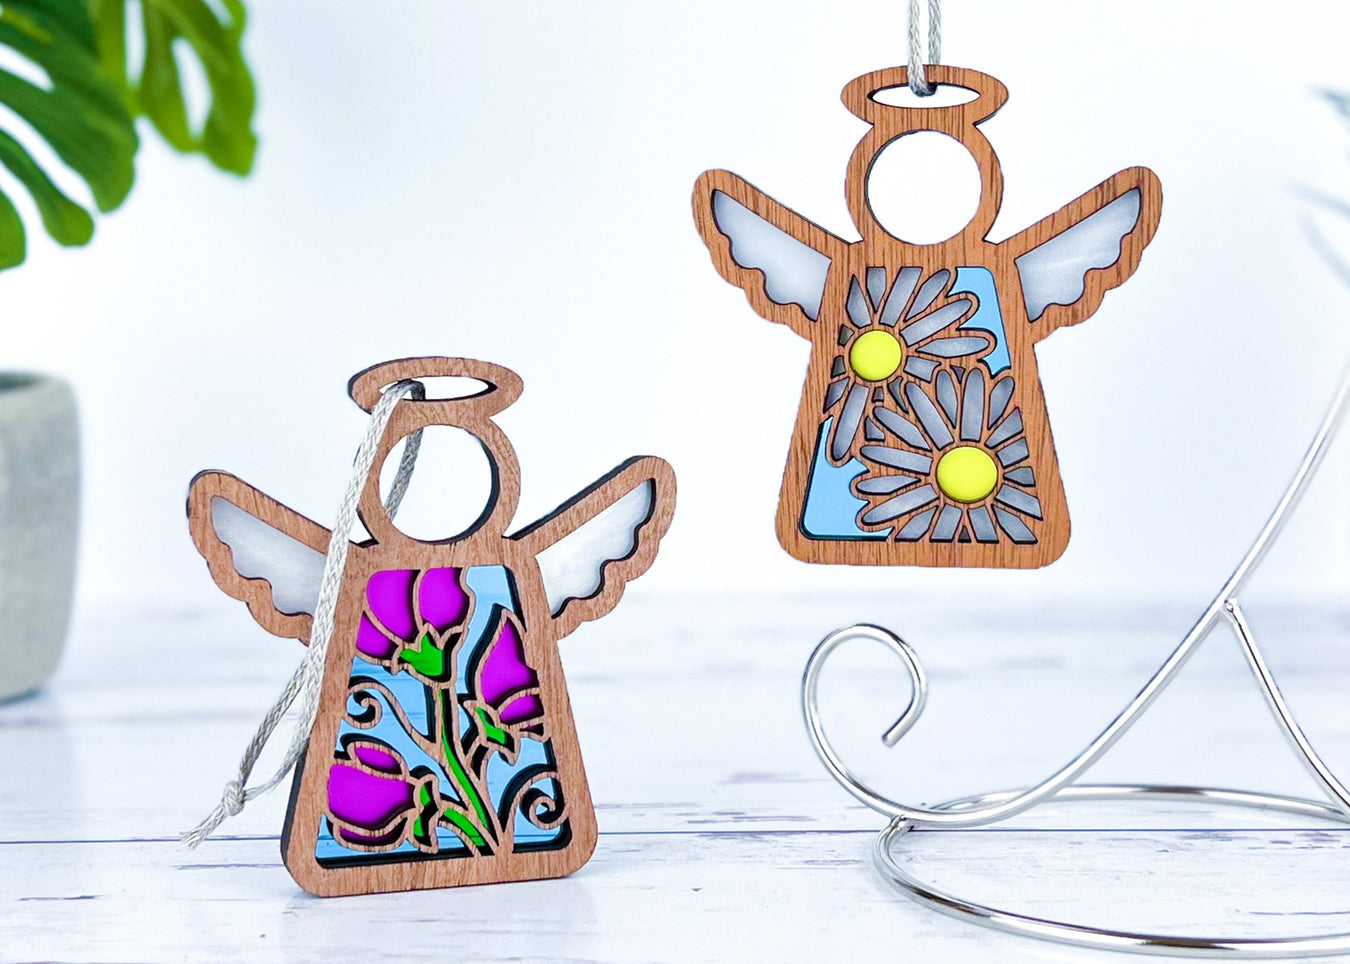 Angel ornaments featuring April birth month flowers, ideal birthday gift ideas for a wife, best friend or special women, showcasing vibrant sweet pea and daisy birth flowers in a stained glass inspired style.